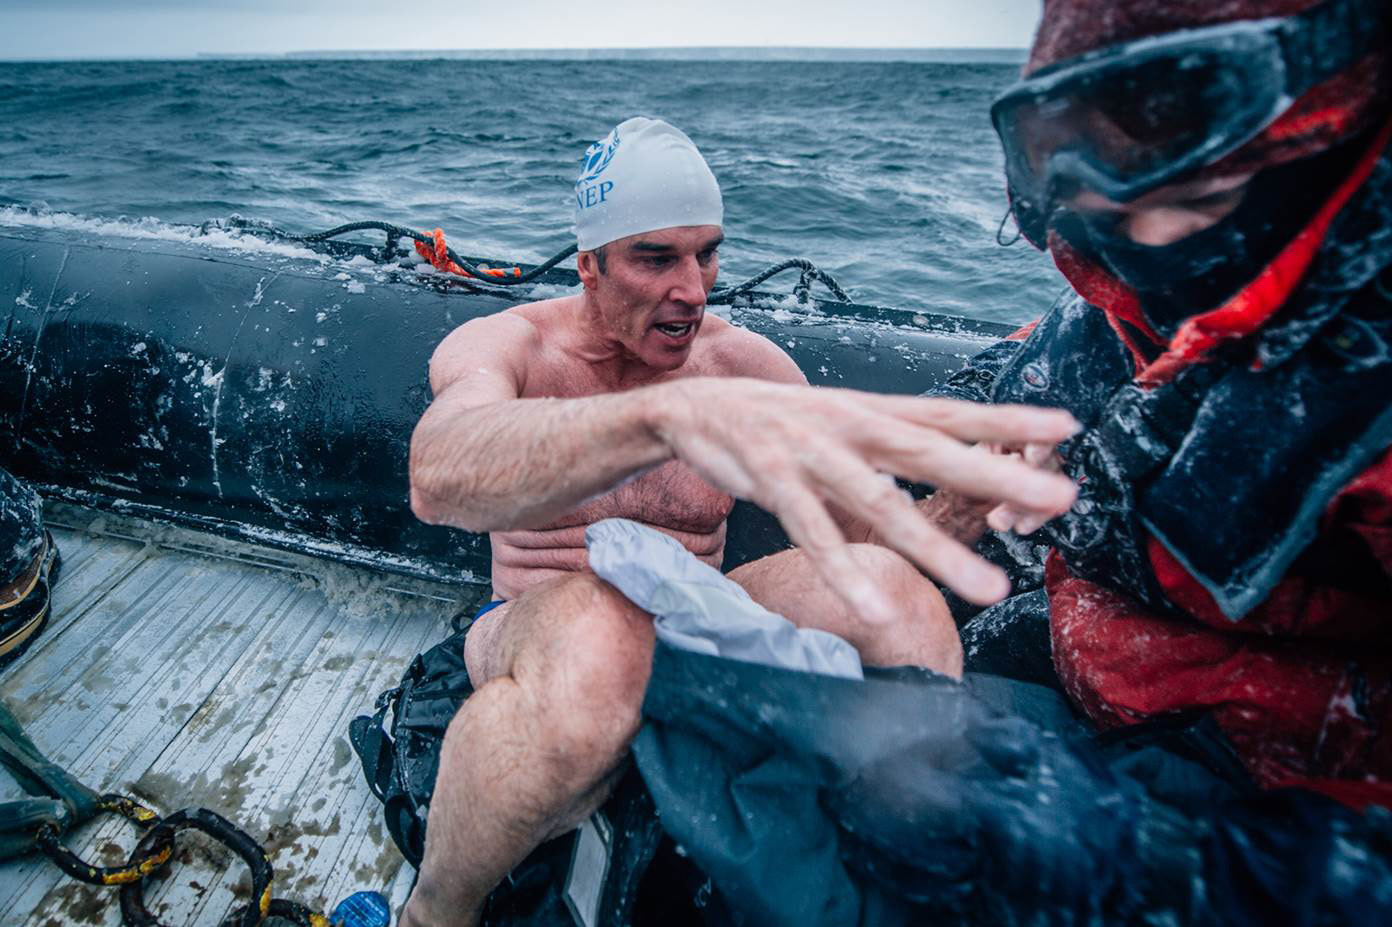 PHOTO: Ocean advocate Lewis Pugh swam for 350 meters in the icy waters of the Bay of Whales in Antarctica’s Ross Sea on March 1, 2015.